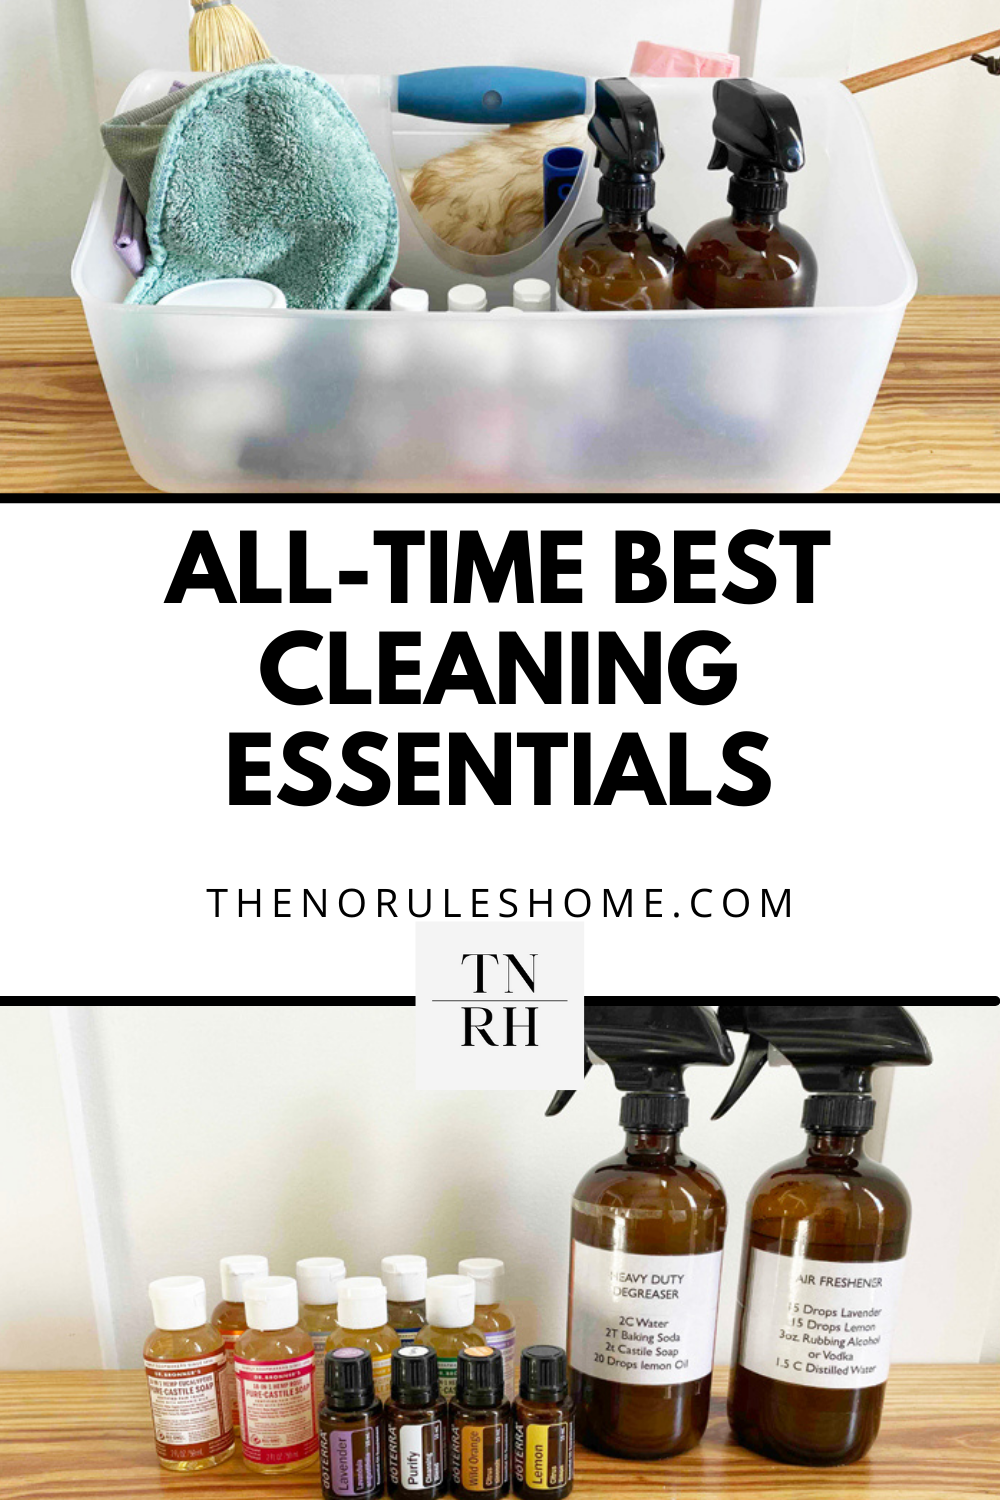 All-Time Best Cleaning Essentials